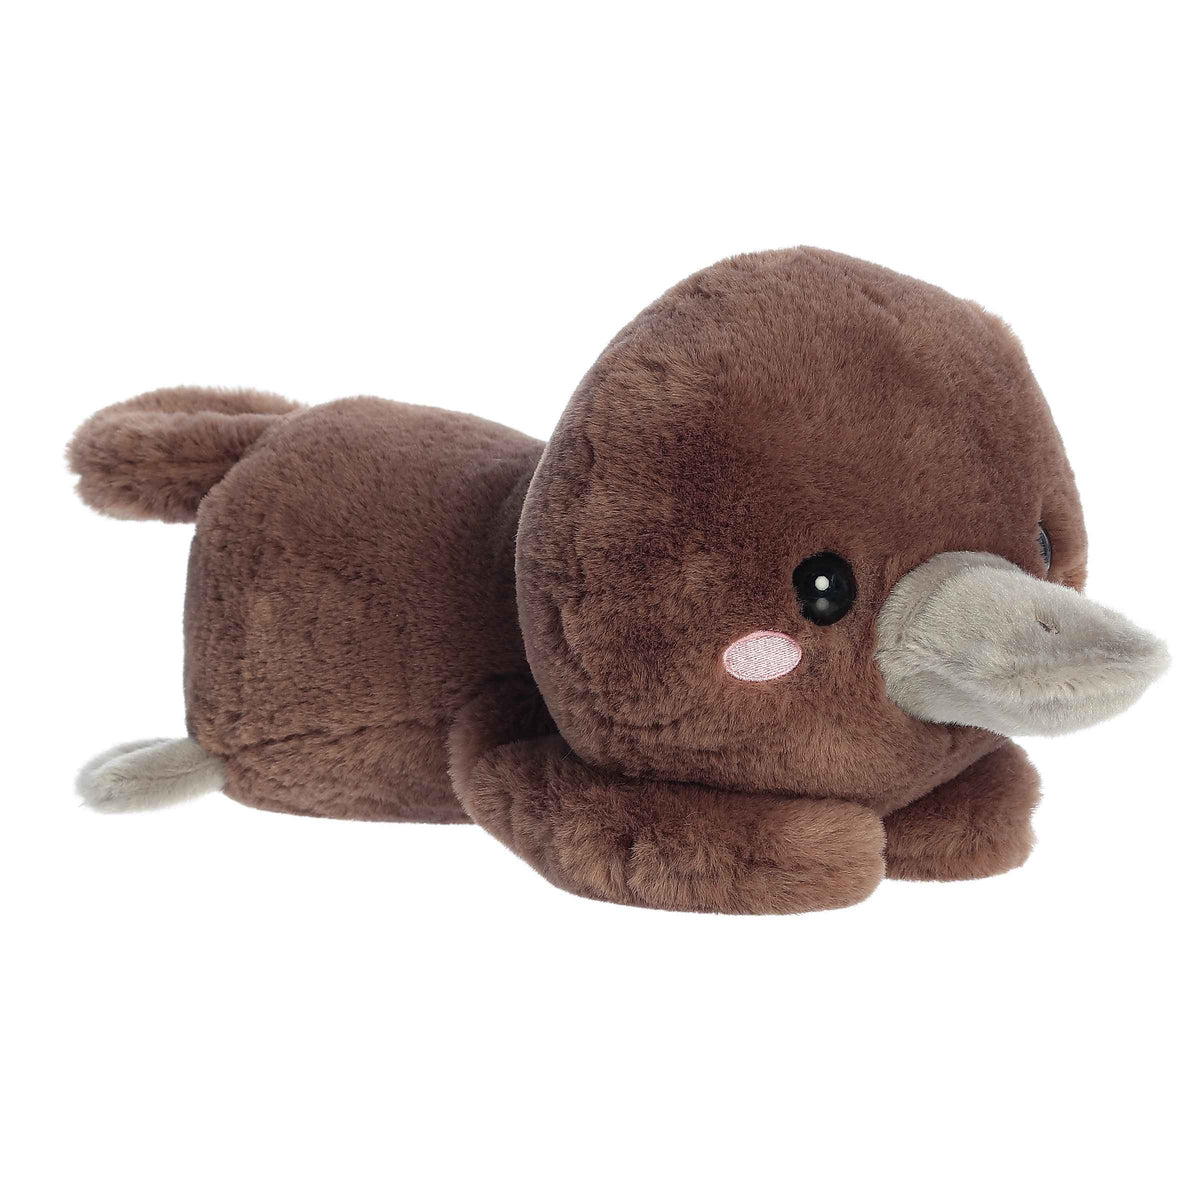 Pimmy Platypus plush from Too Cute Collection by Aurora plush, brown coat with big sparkly eyes in the laying down position